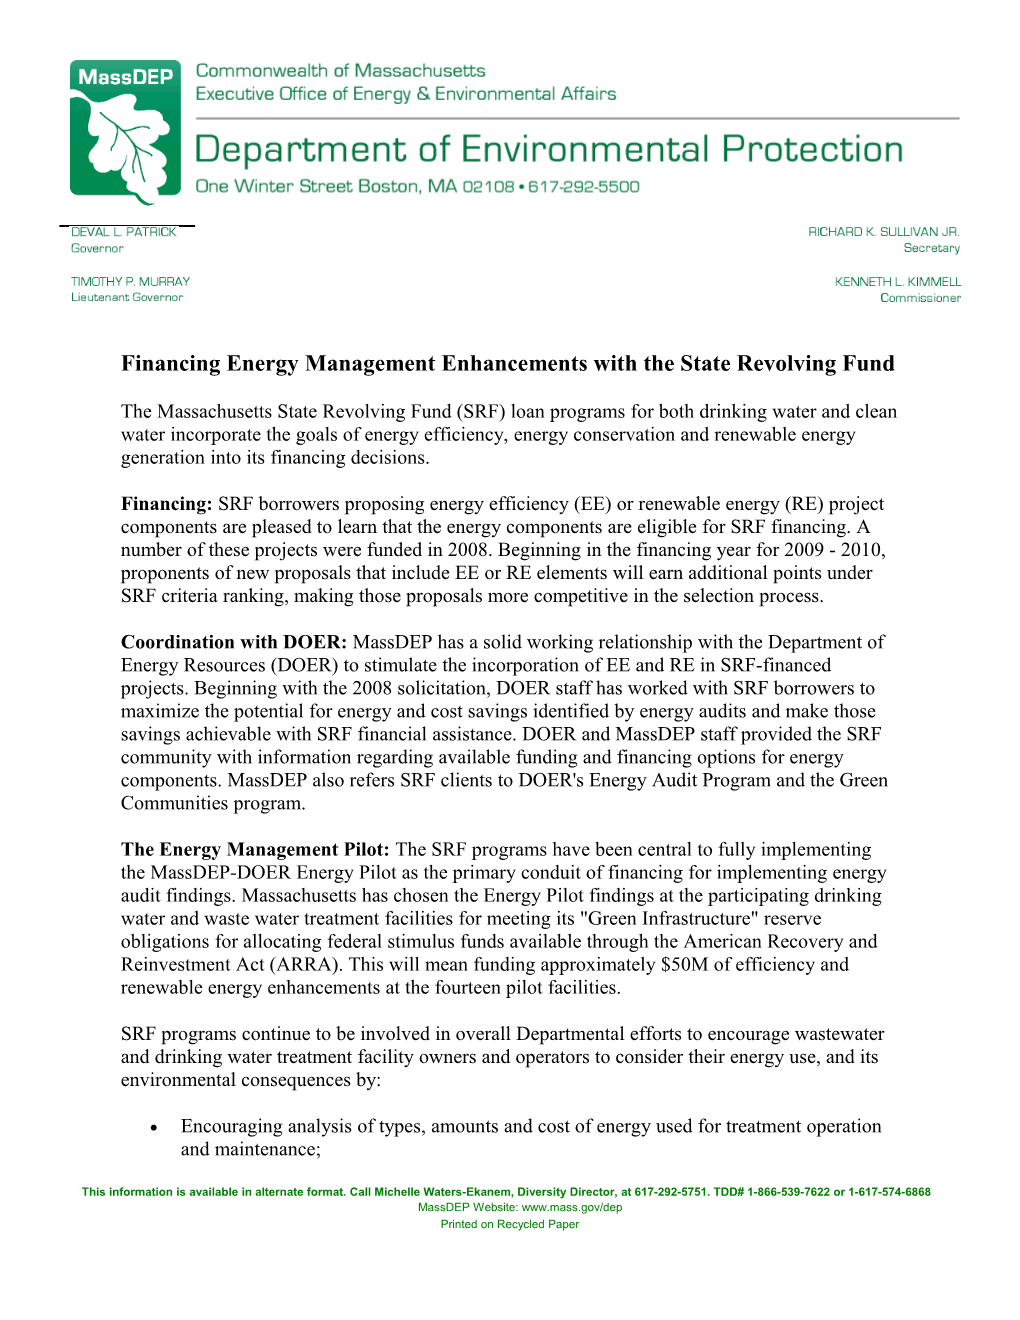 Financing Energy Management Enhancements with the State Revolving Fund